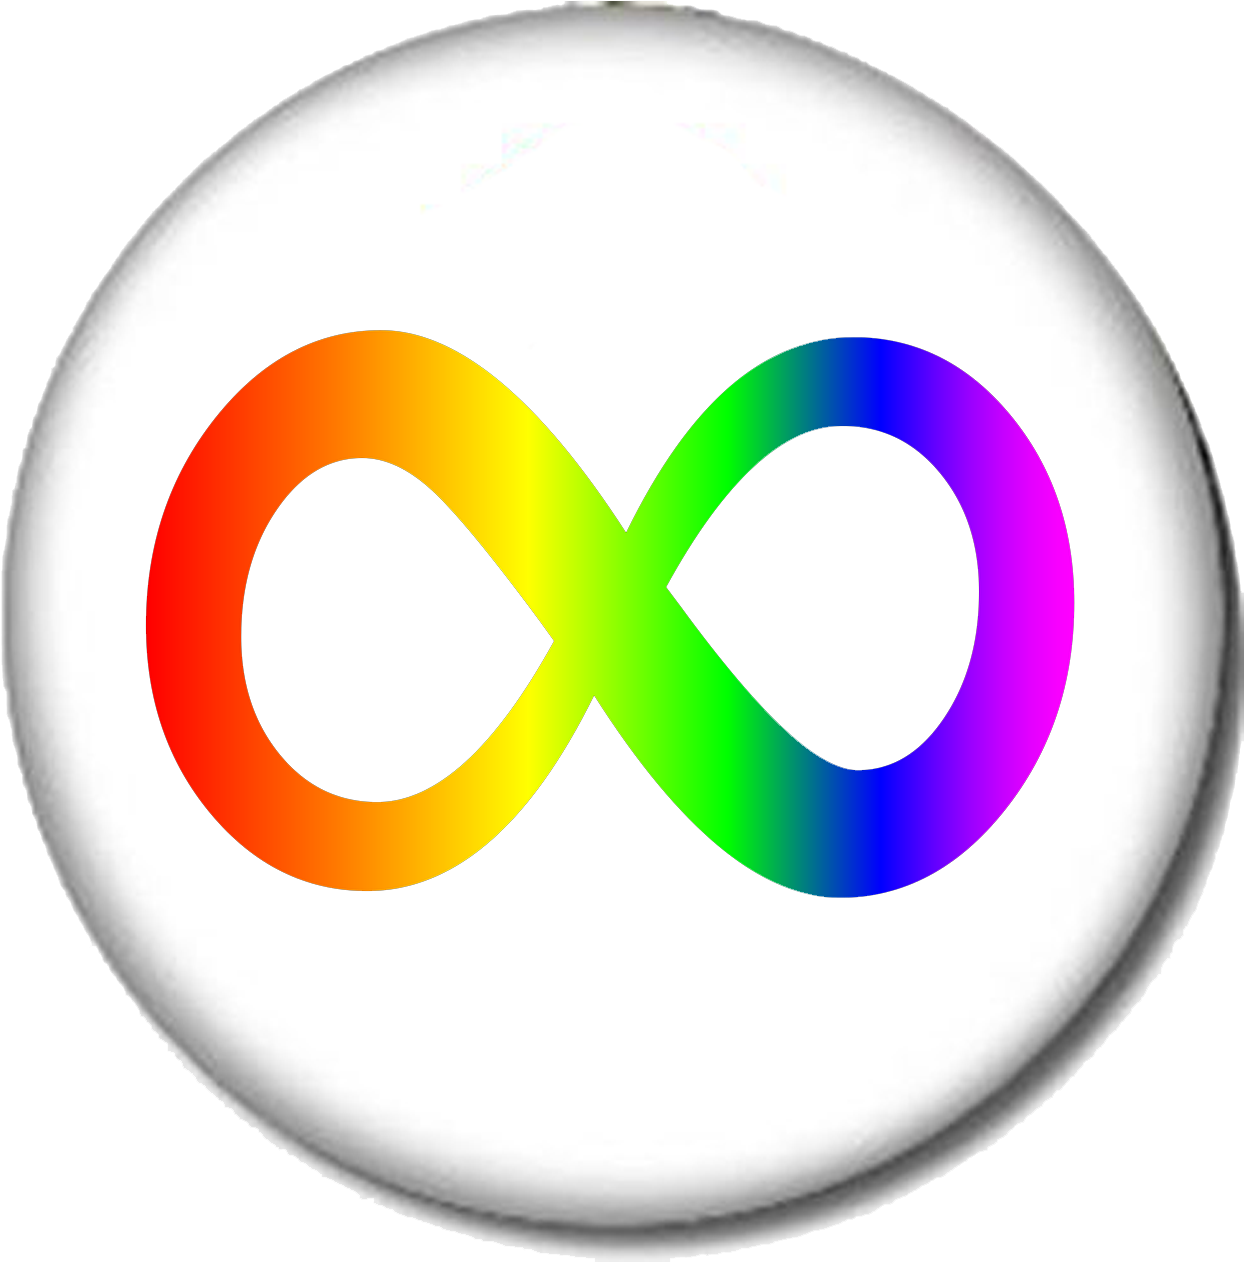 A Rainbow Colored Infinity Symbol